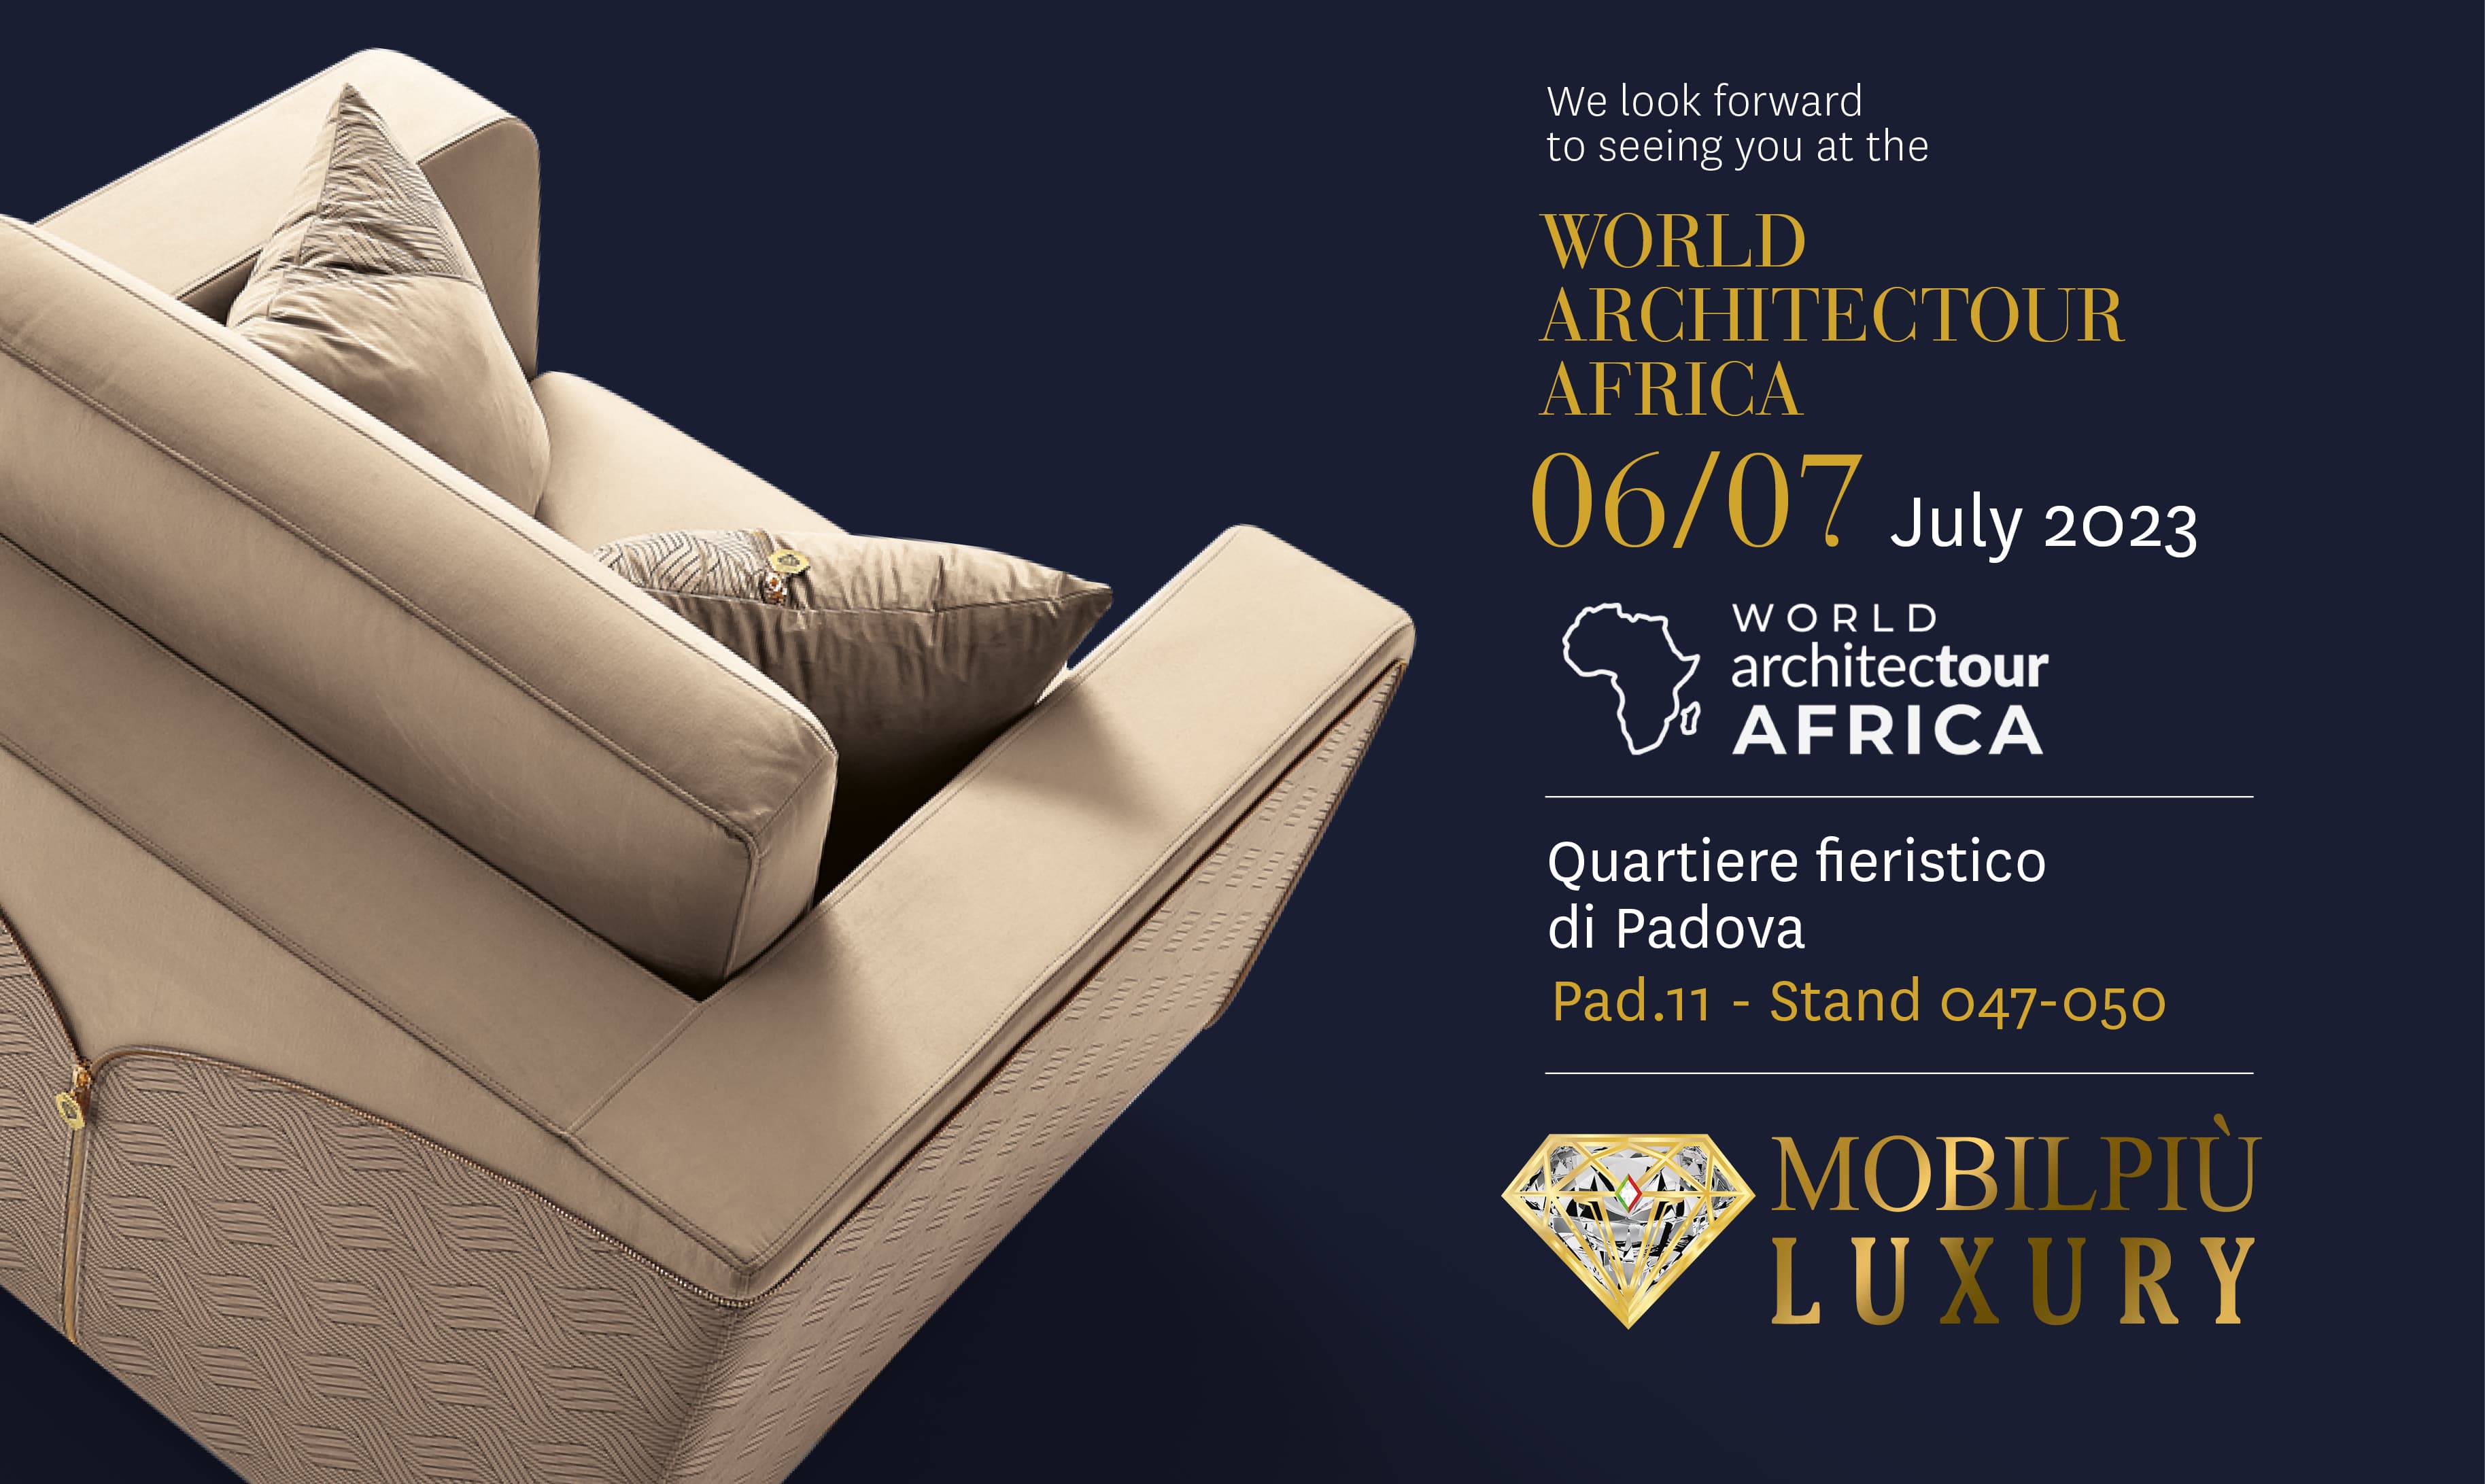 MobilpiùLuxury at World Architectour Africa 2023